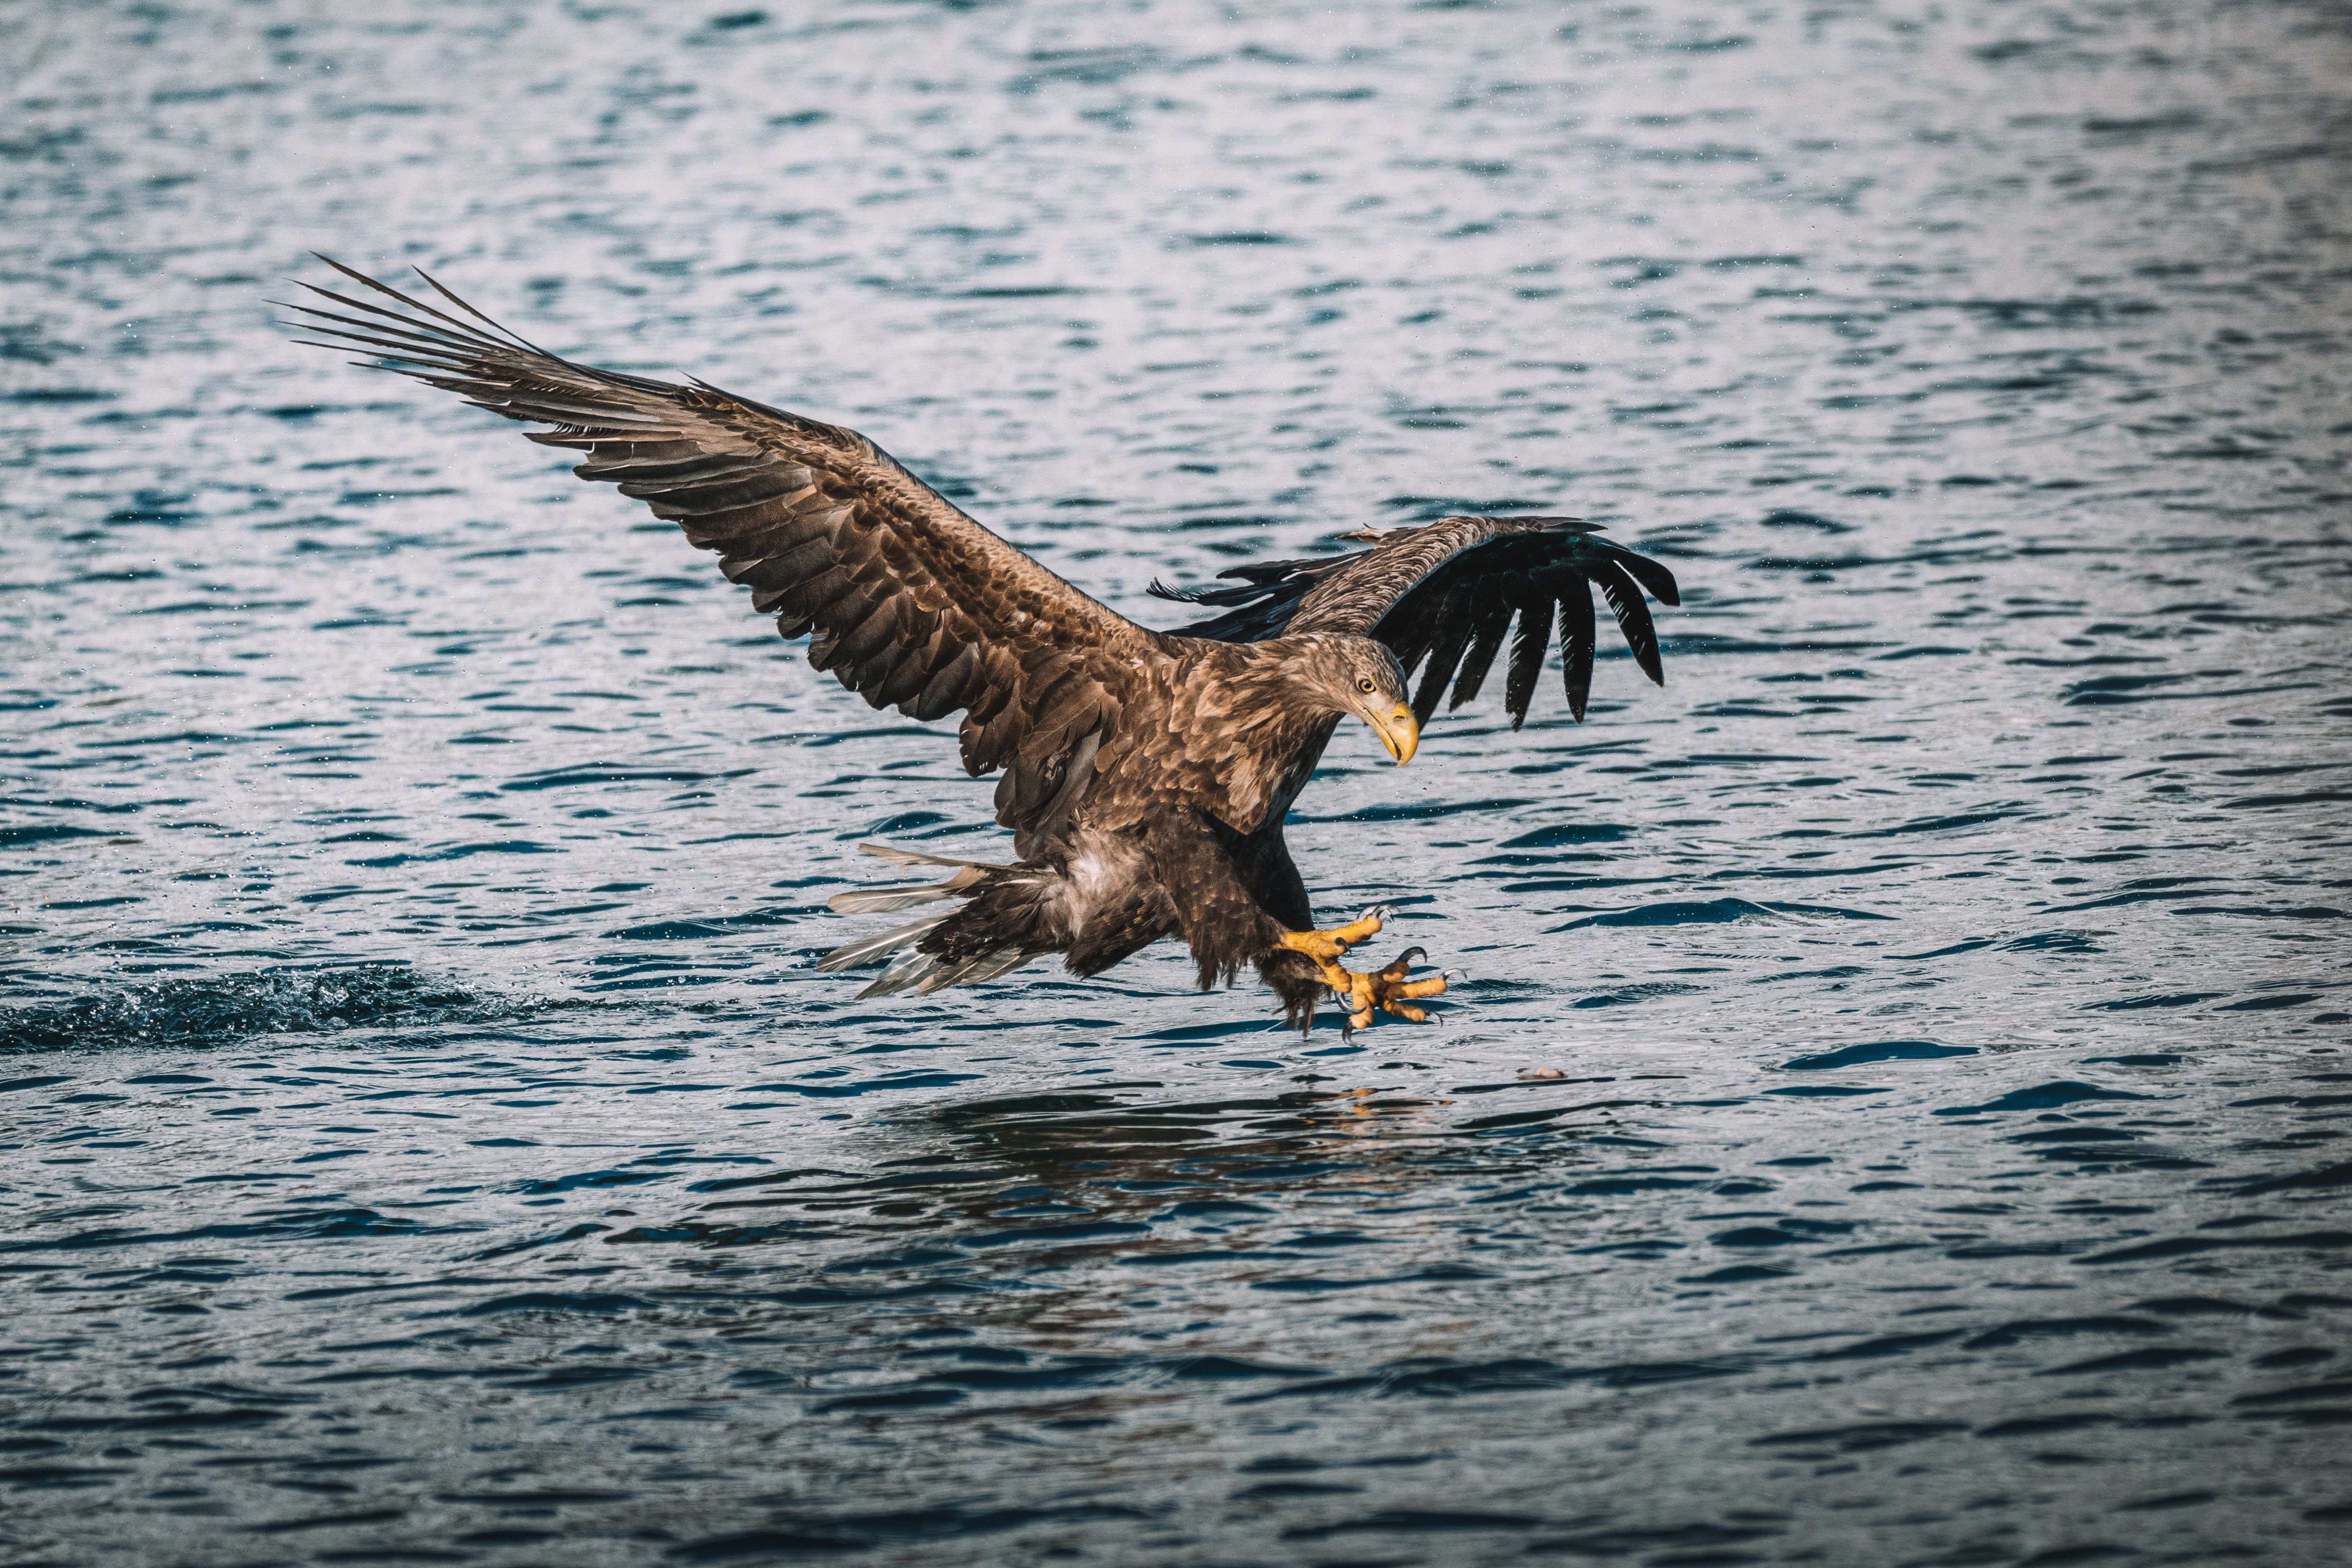 photo of a sea eagle about to capture a fish